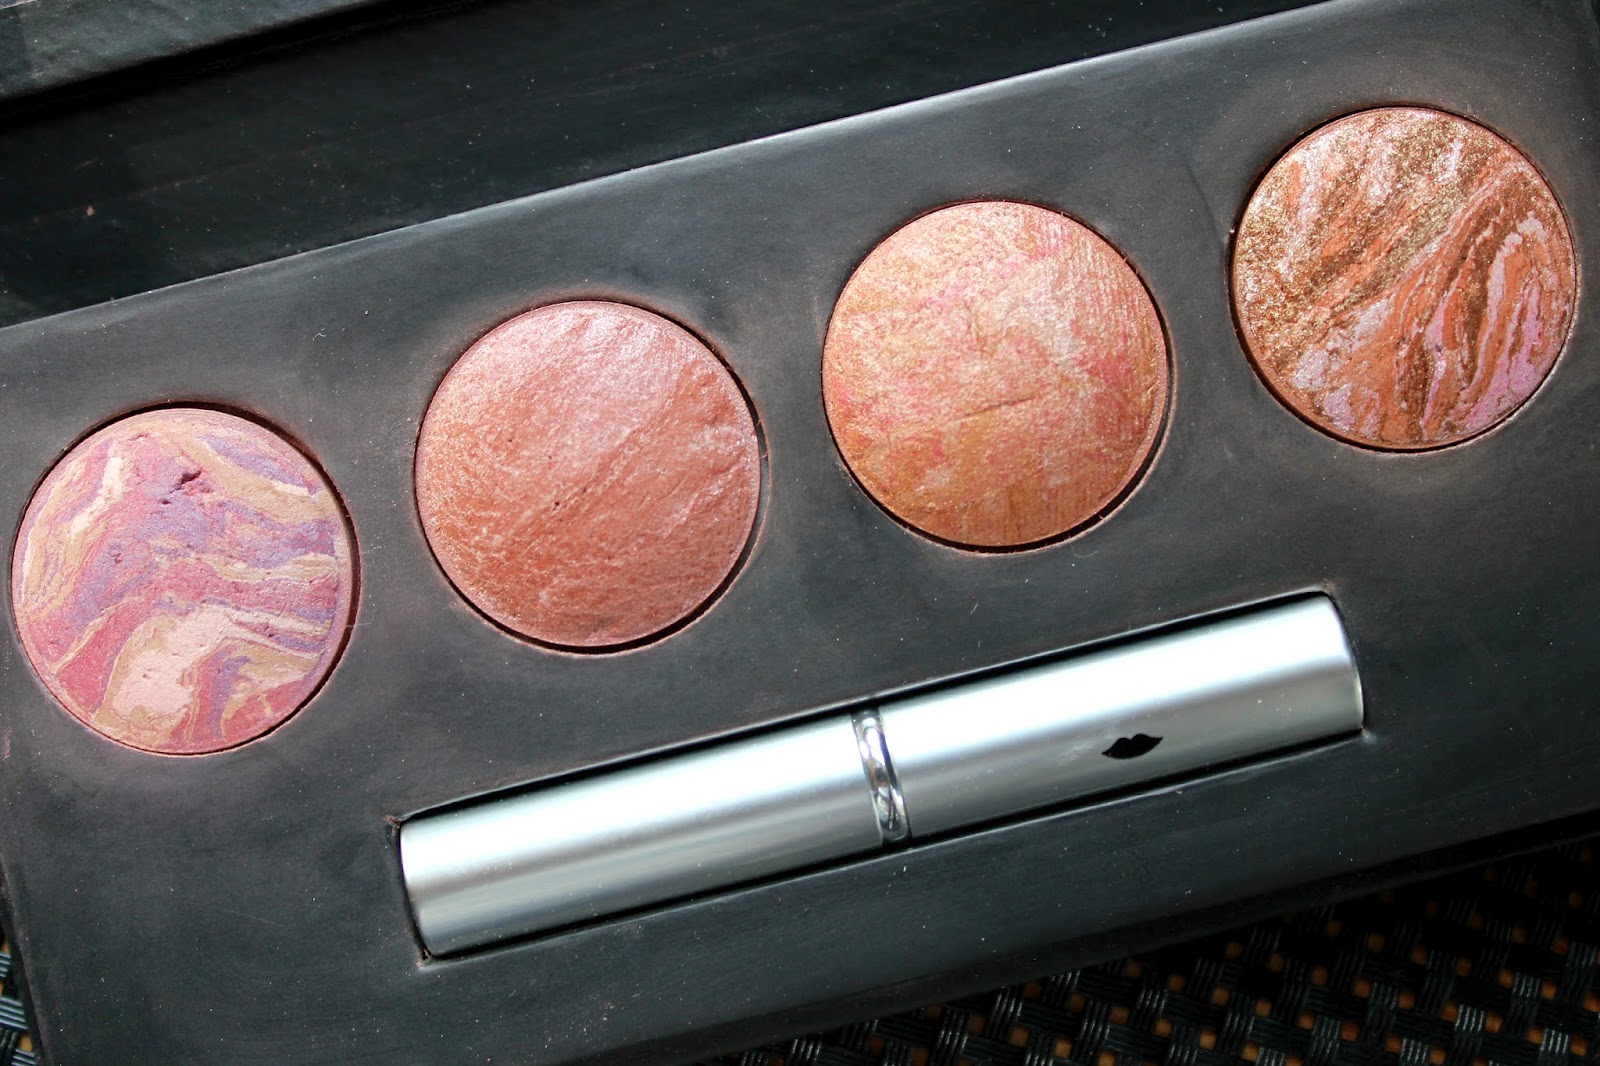 A picture of the Laura Geller Baby Cakes Baked Blush Palette